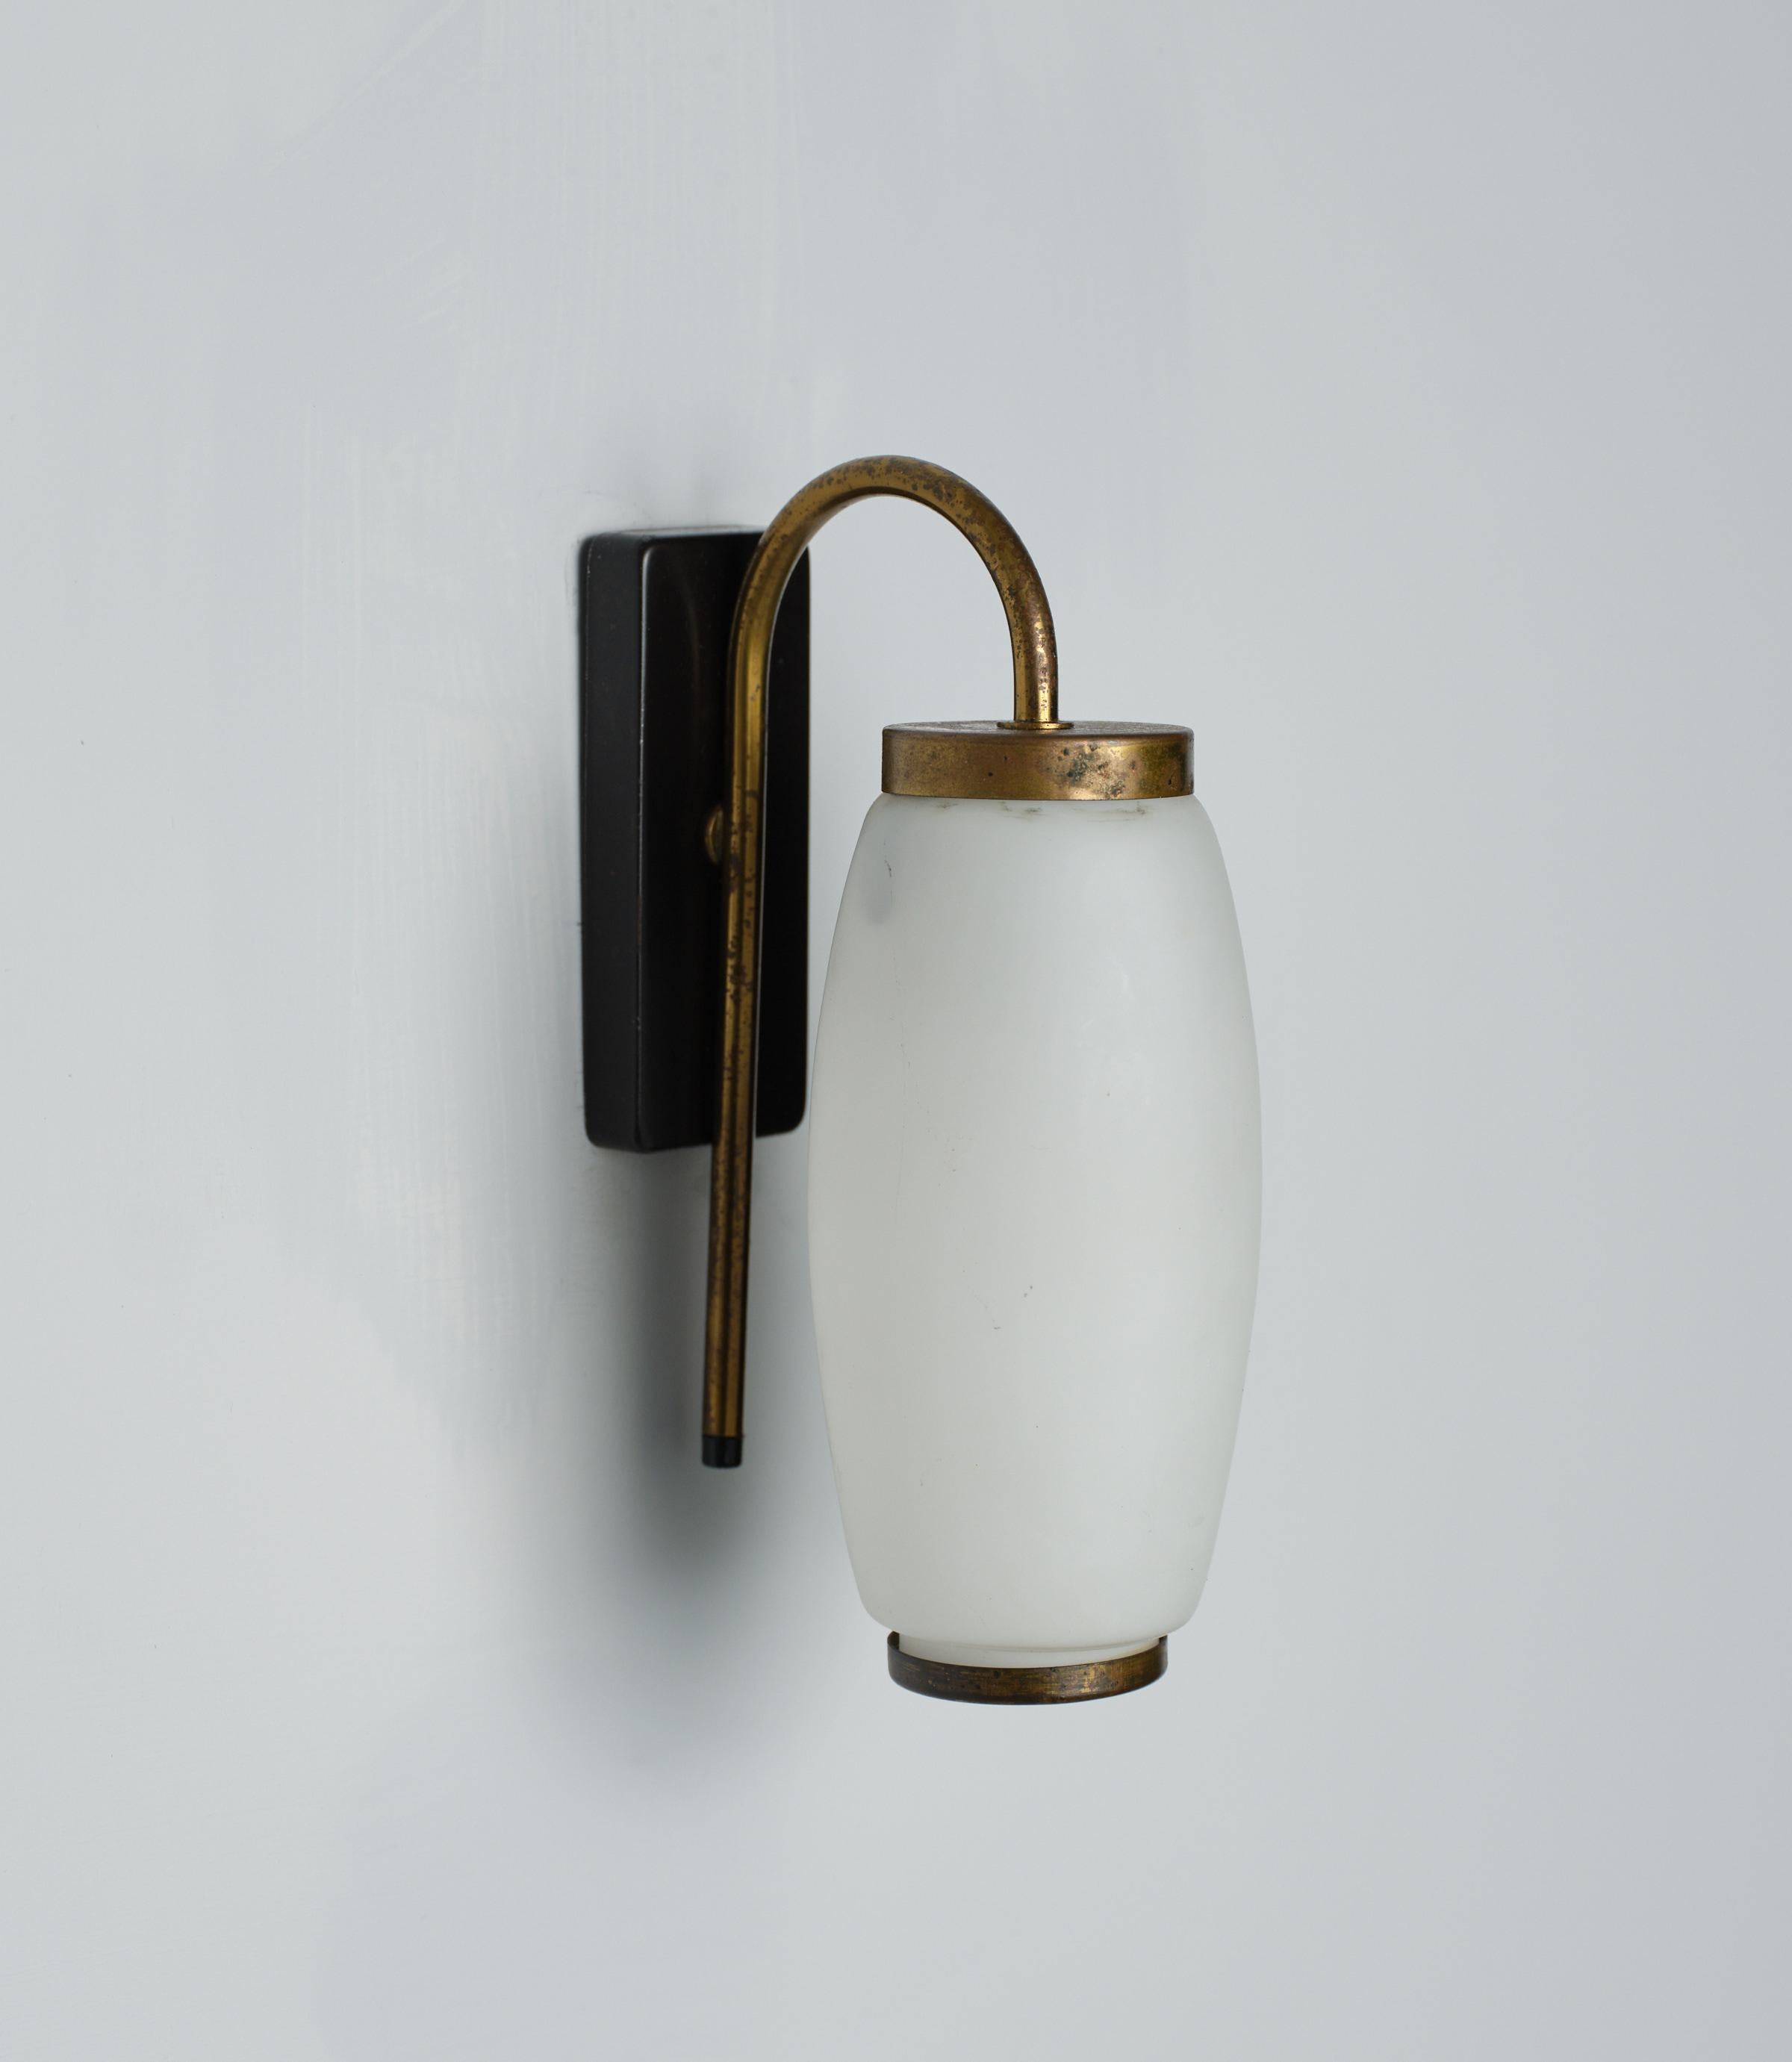 Presenting one vintage Italian wall lamp. Crafted in the 1950s, these elegant appliques feature a combination of brass, black lacquered metal, and opaline glass, showcasing authentic design from the era. The brass boasts its original patina, while